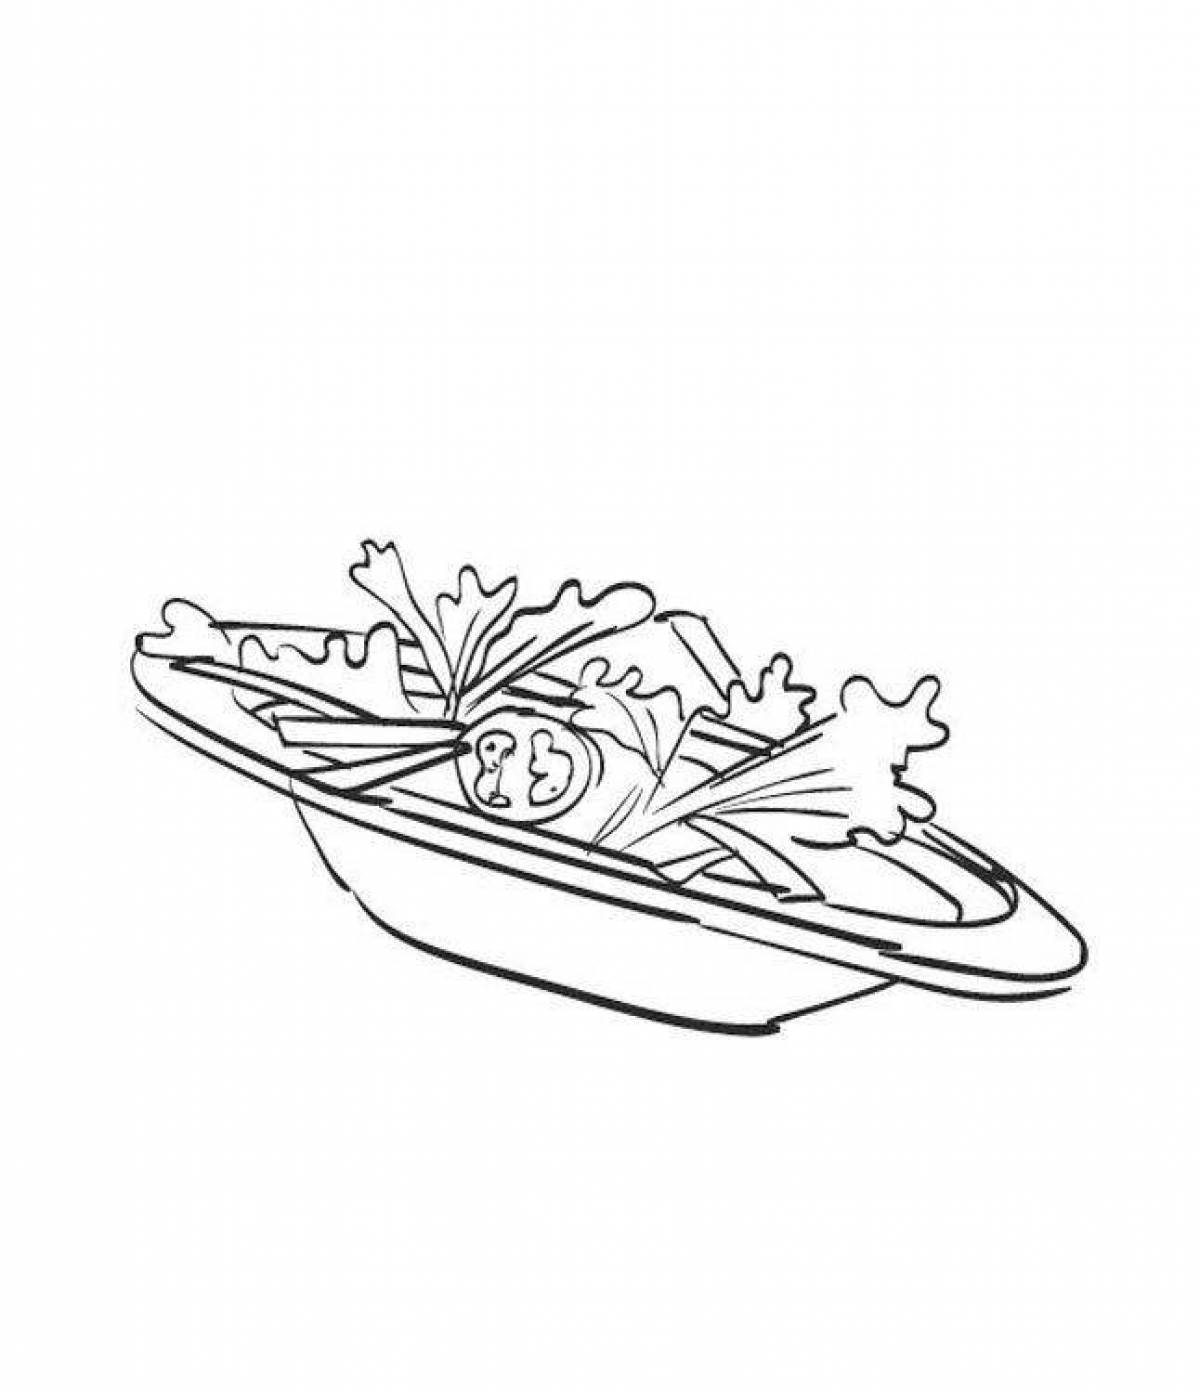 Healthy lettuce coloring page